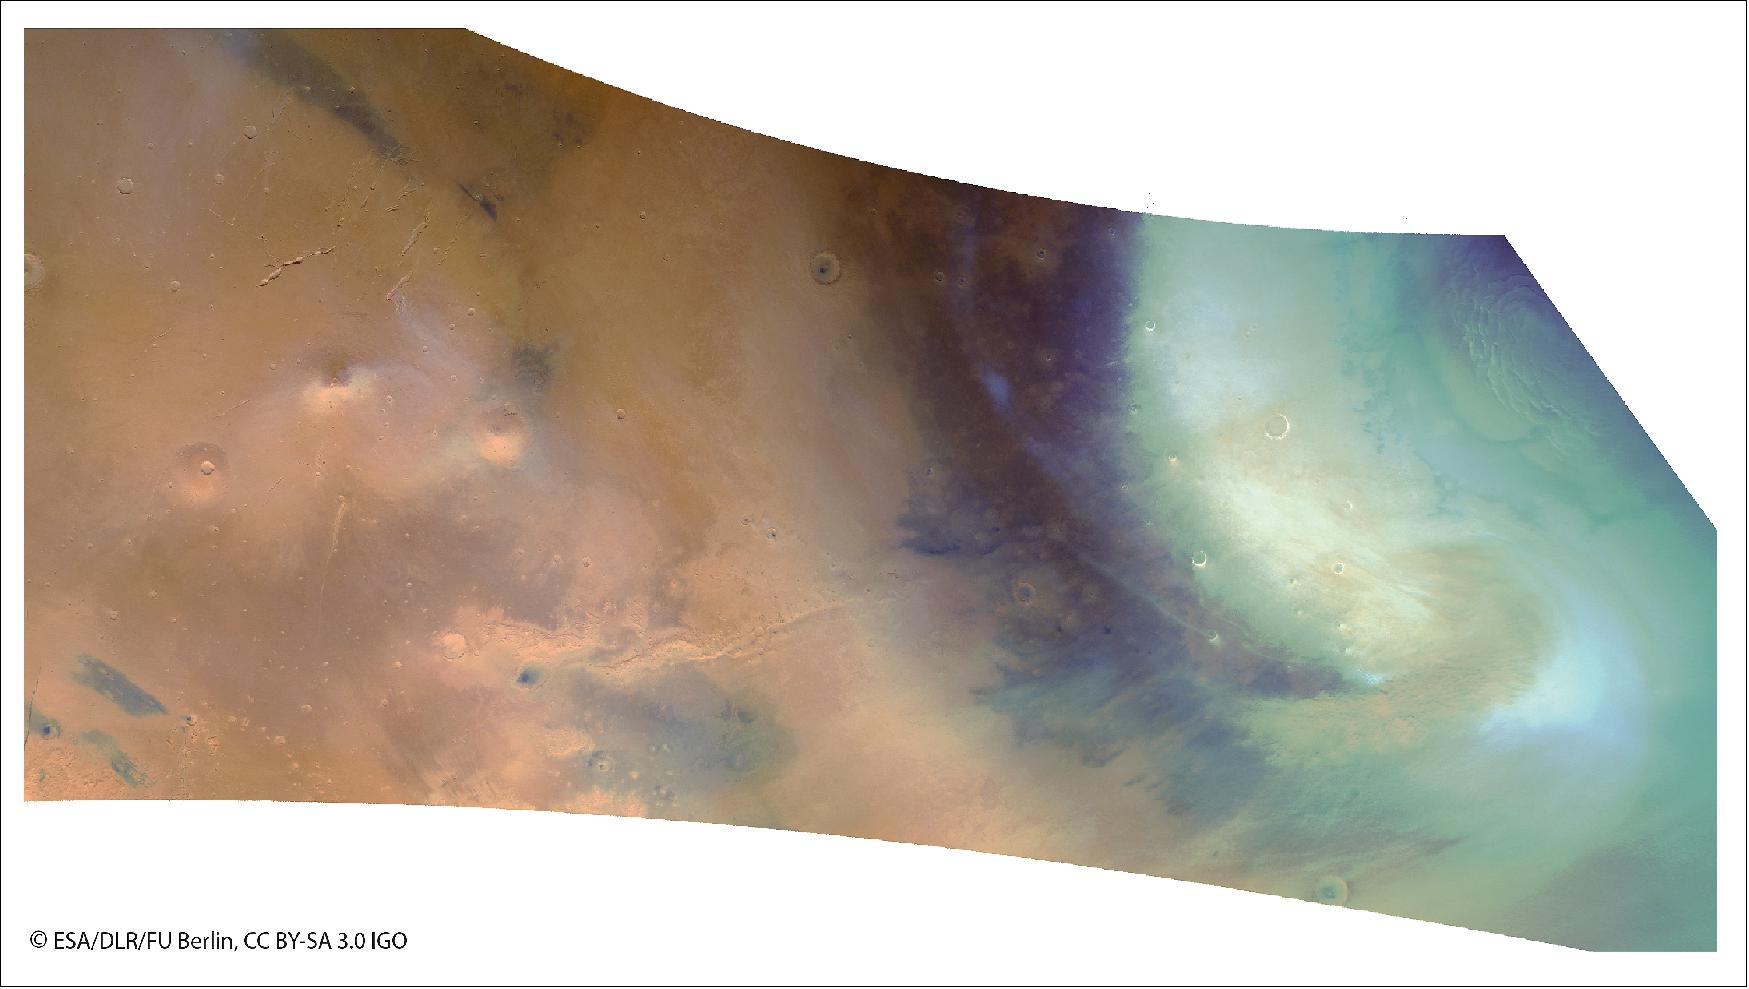 Figure 26: Spiral dust storm on Mars. This image was taken by the High Resolution Stereo Camera on 26 May and covers an area of about two thousand by five thousand kilometers (image credit: ESA/DLR/FU Berlin, CC BY-SA 3.0 IGO)